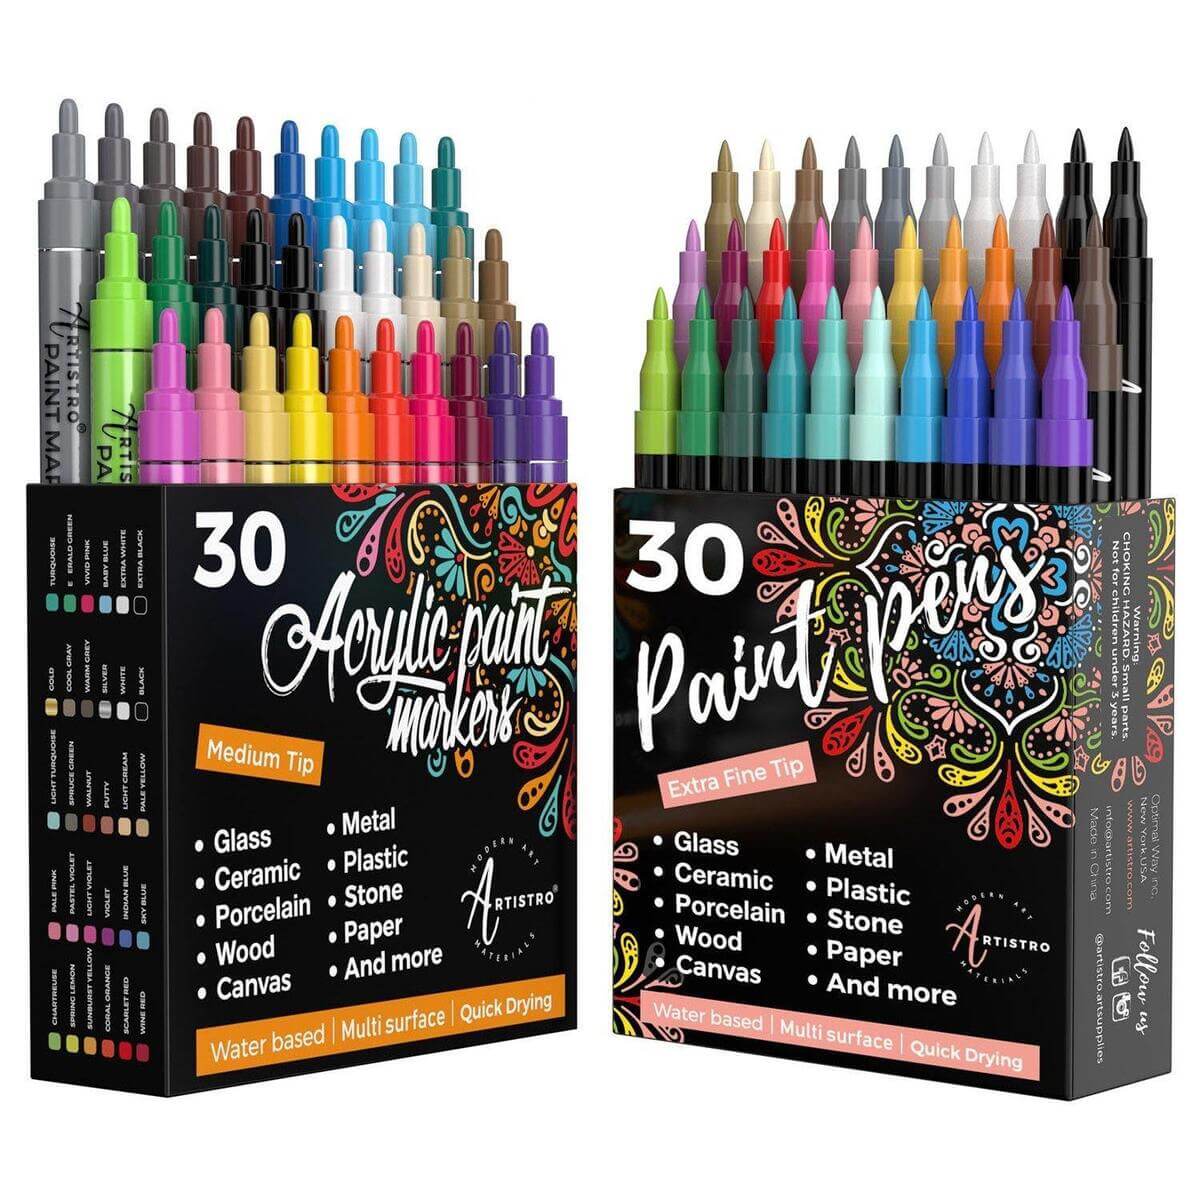 24 Artistro Cute Acrylic Paint Pens 12 White 12 Black Markers Medium Tip  for Rock Painting, Wood and Glass Art, Artist Gifts, Kids Craft -  Hong  Kong